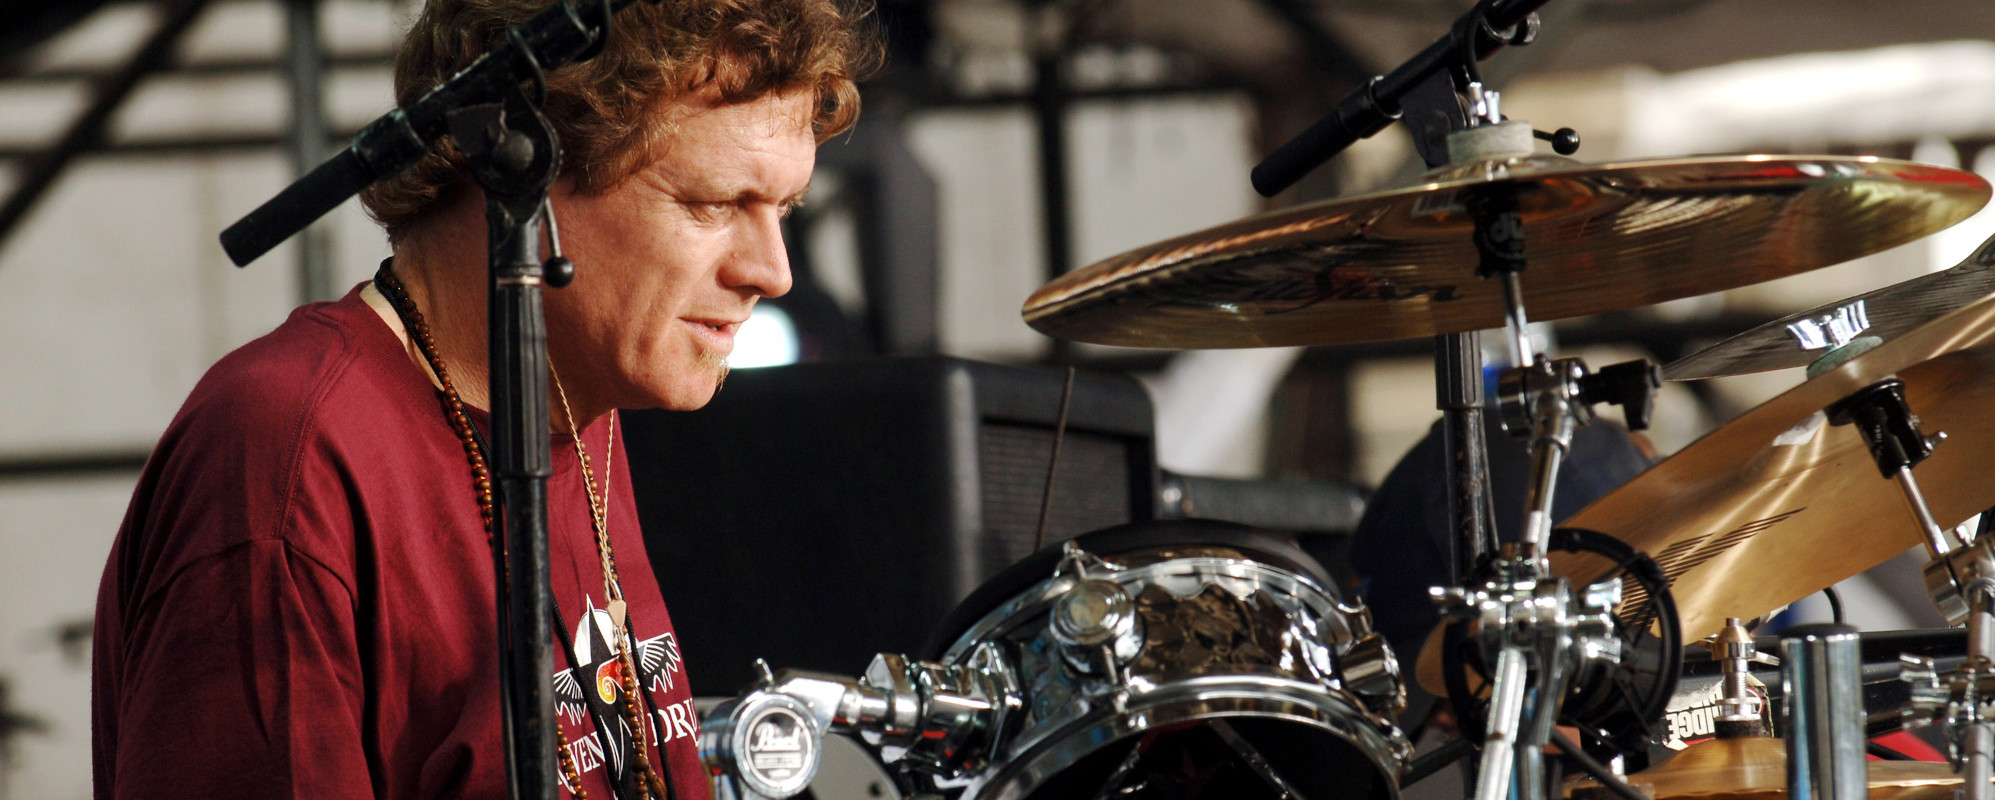 Def Leppard Drummer Rick Allen Thought His Career Was Over After Losing His Arm in Car Wreck